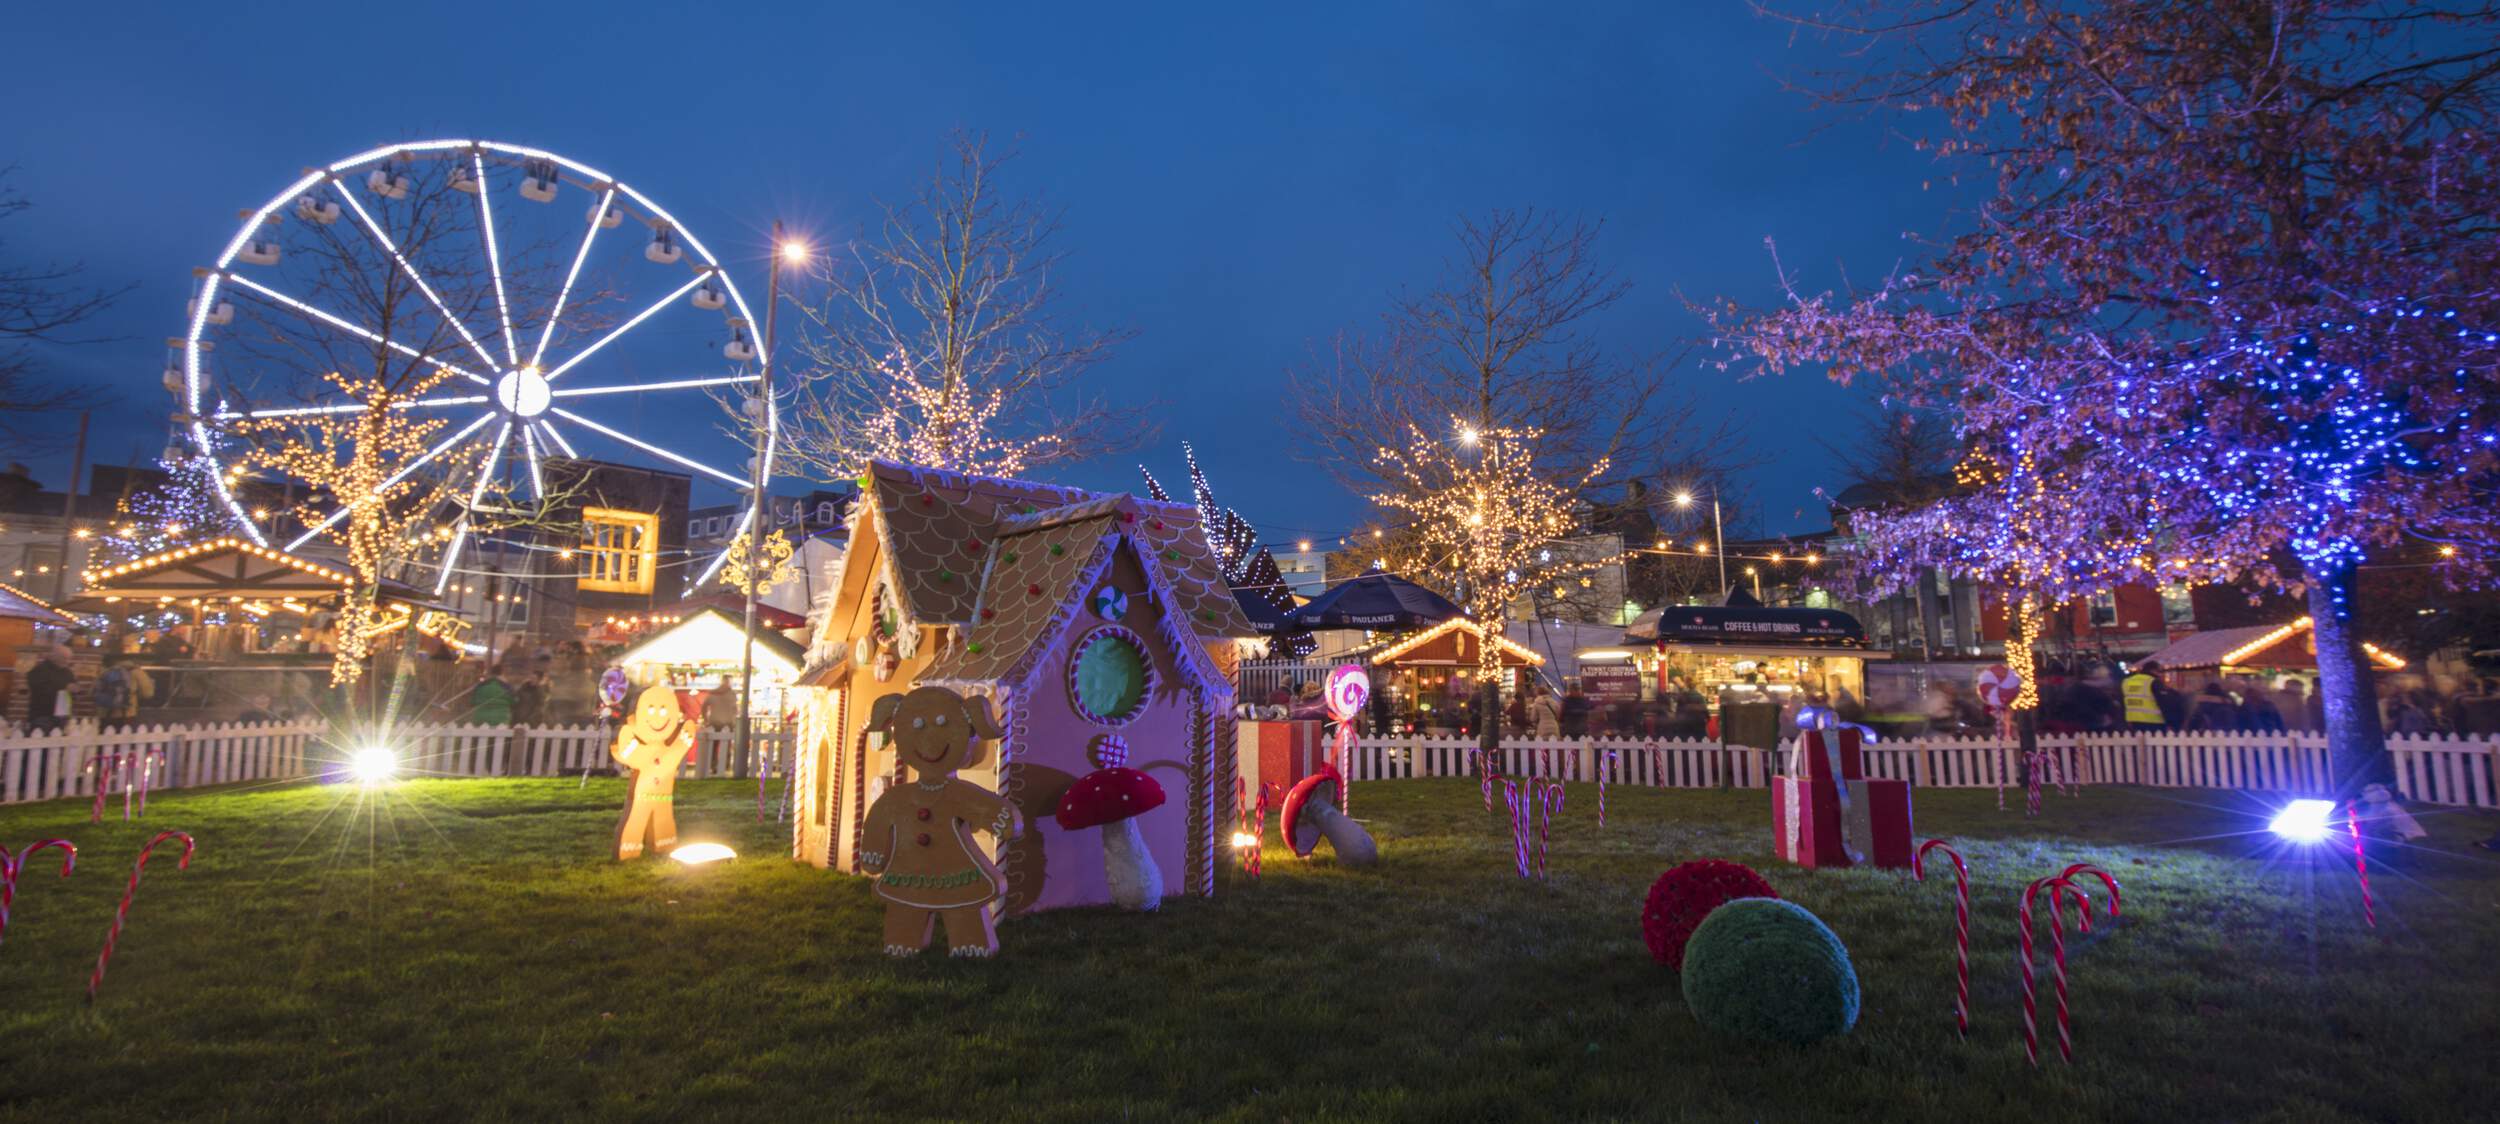 The festive market of Galway, with lights and stalls and amusement rides